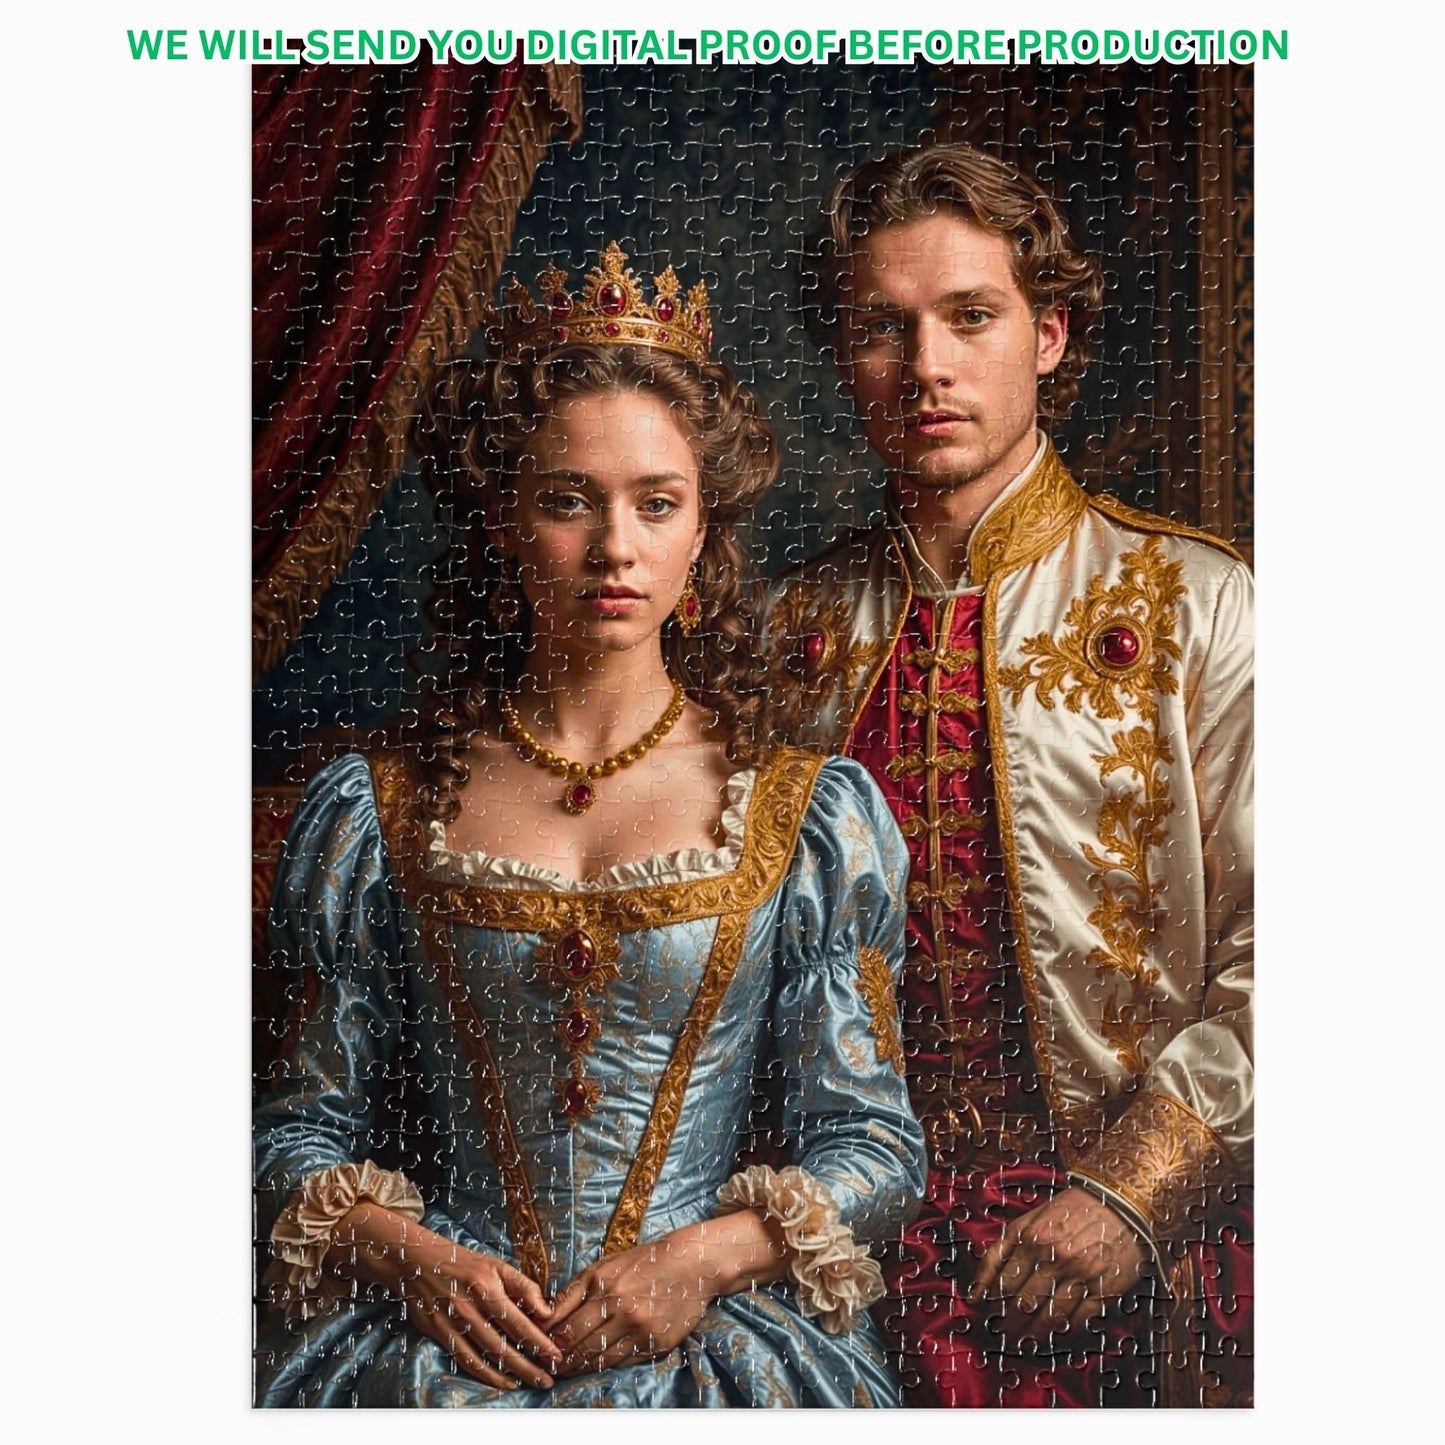 Delight with a personalized royal couple puzzle, crafted from your favorite photo. Ideal for birthdays, anniversaries, or as a unique gift. Choose from 252, 500, or 1000-piece sets, all beautifully packaged in gift-ready metal boxes.